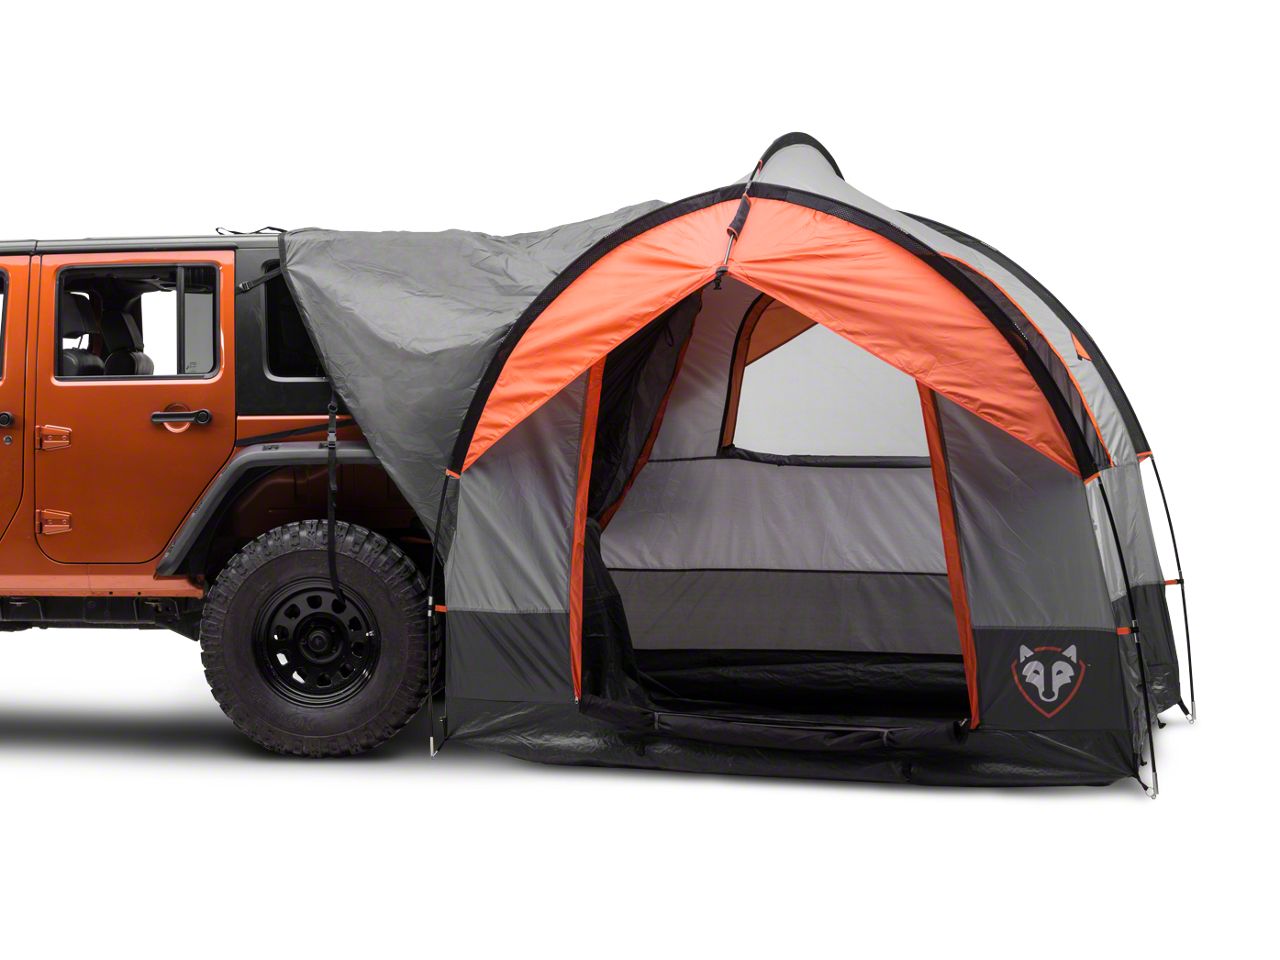 Gladiator Roof Top Tents & Camping Gear